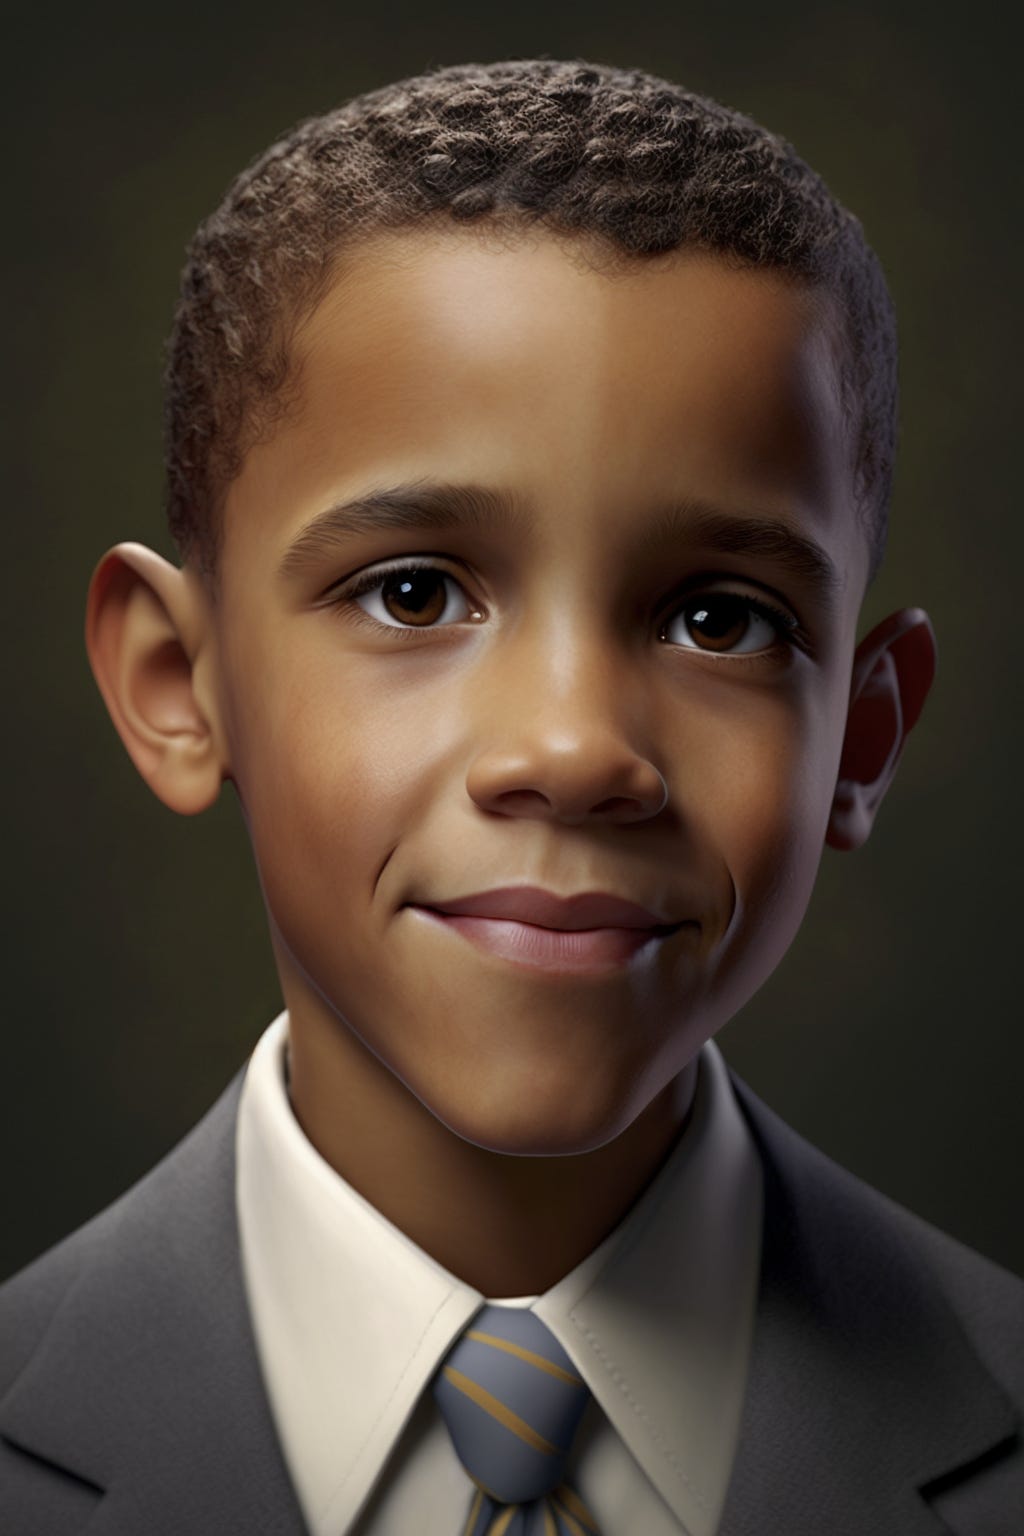 Barack Obama as a kid, portrait, close-up shot, studio photography, volumetric lighting, wearing a suite, smiling, mischievous, realistic, 50mm, expressive, iconic, 4k